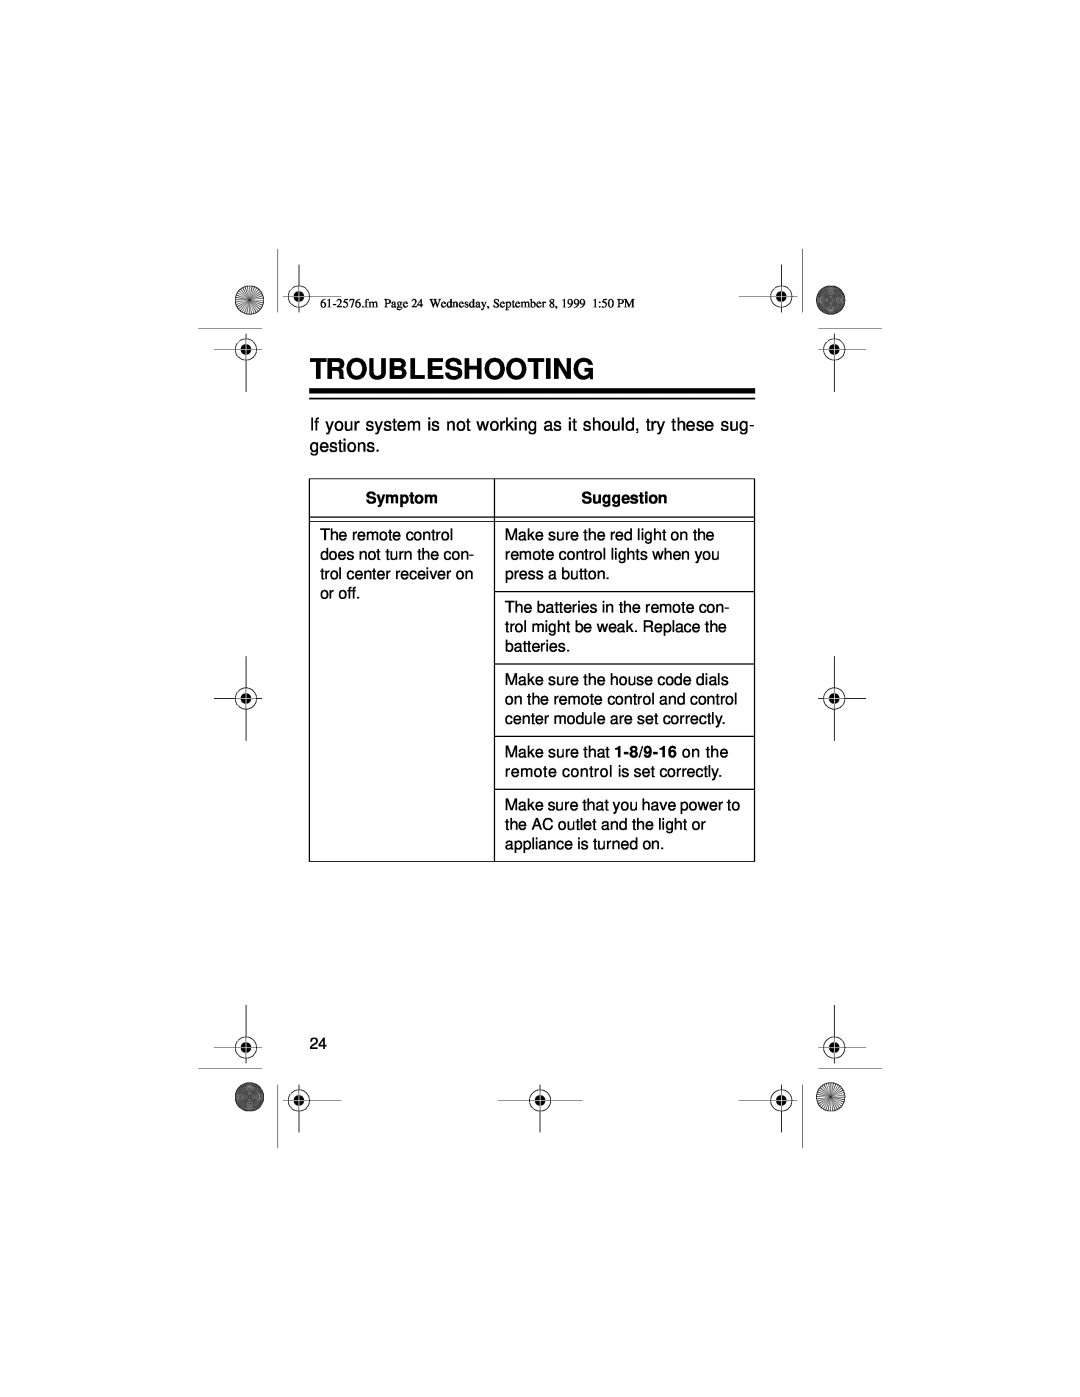 Radio Shack Wireless Remote Control System owner manual Troubleshooting, Symptom, Suggestion 